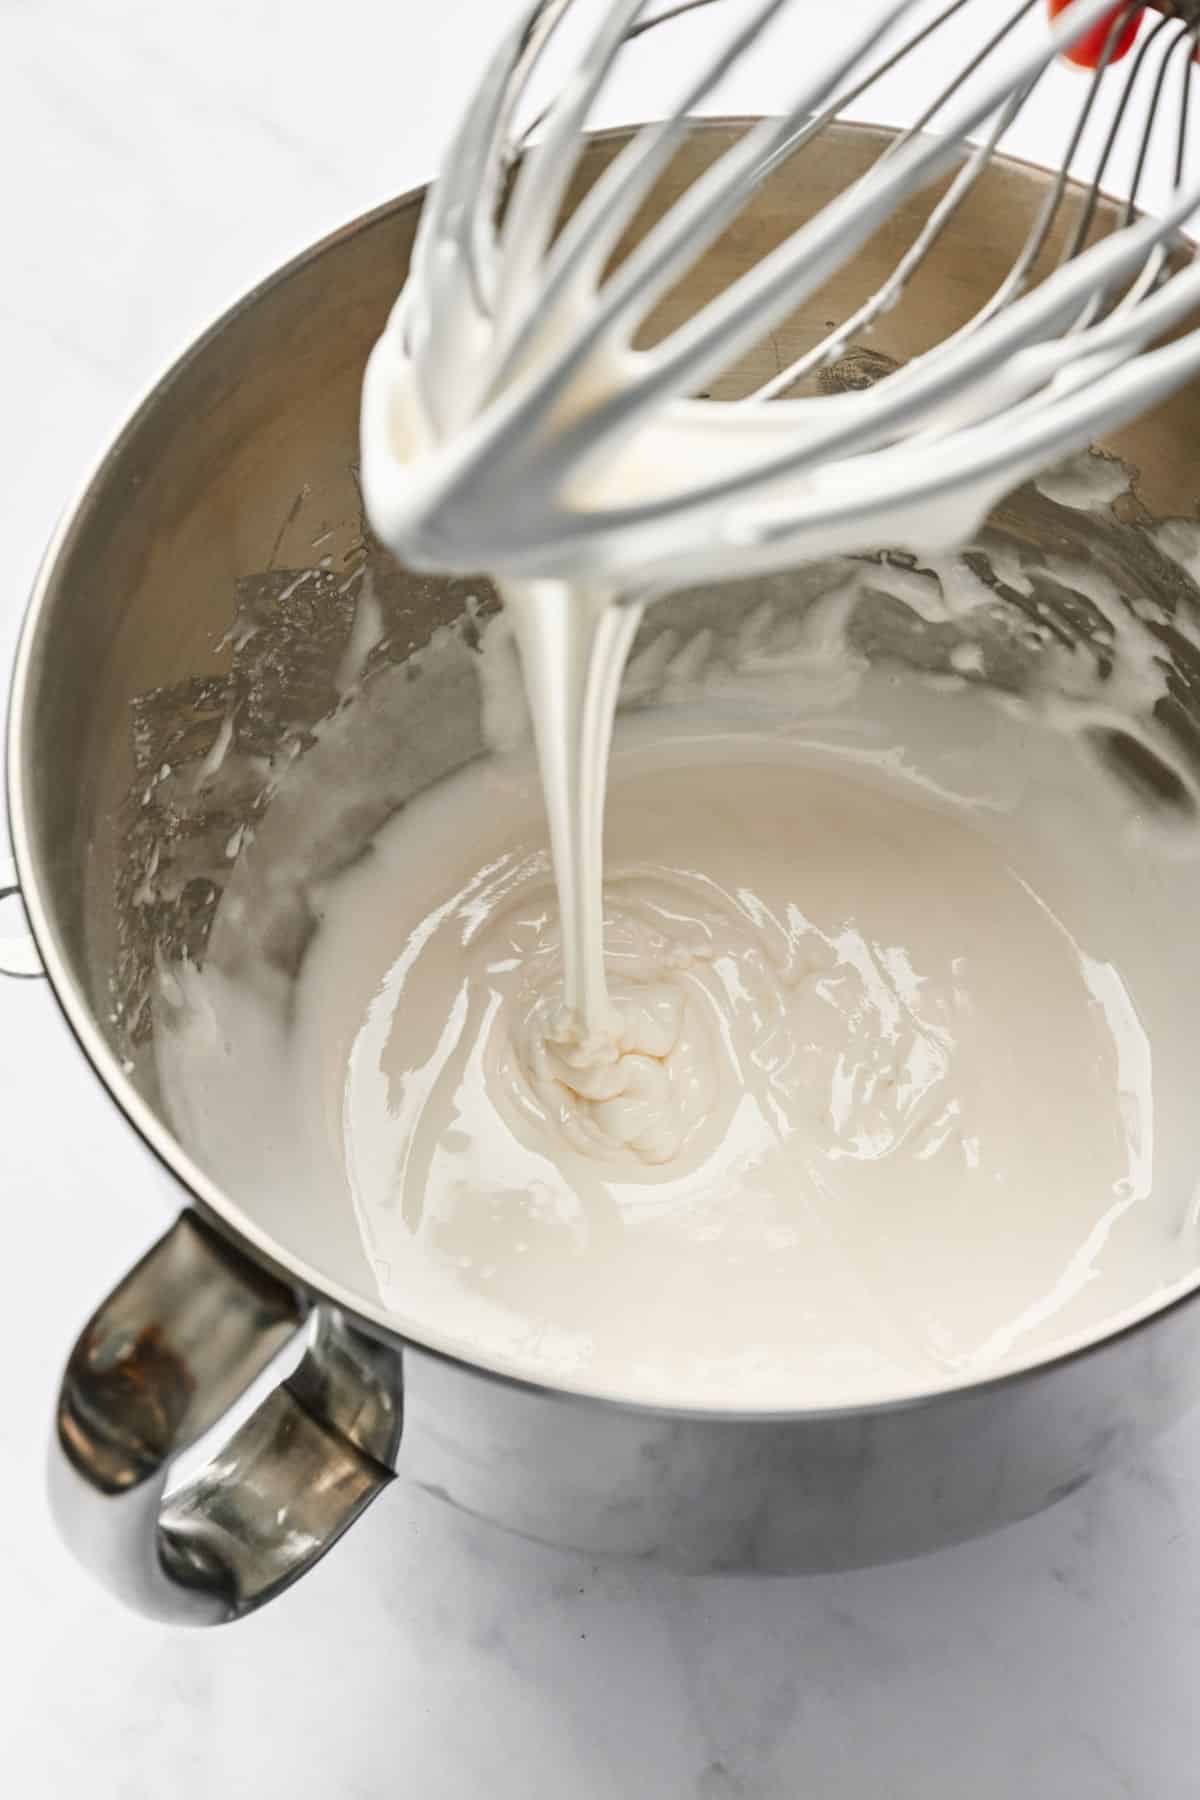 A wire whisk attachment with royal icing streaming off of it.